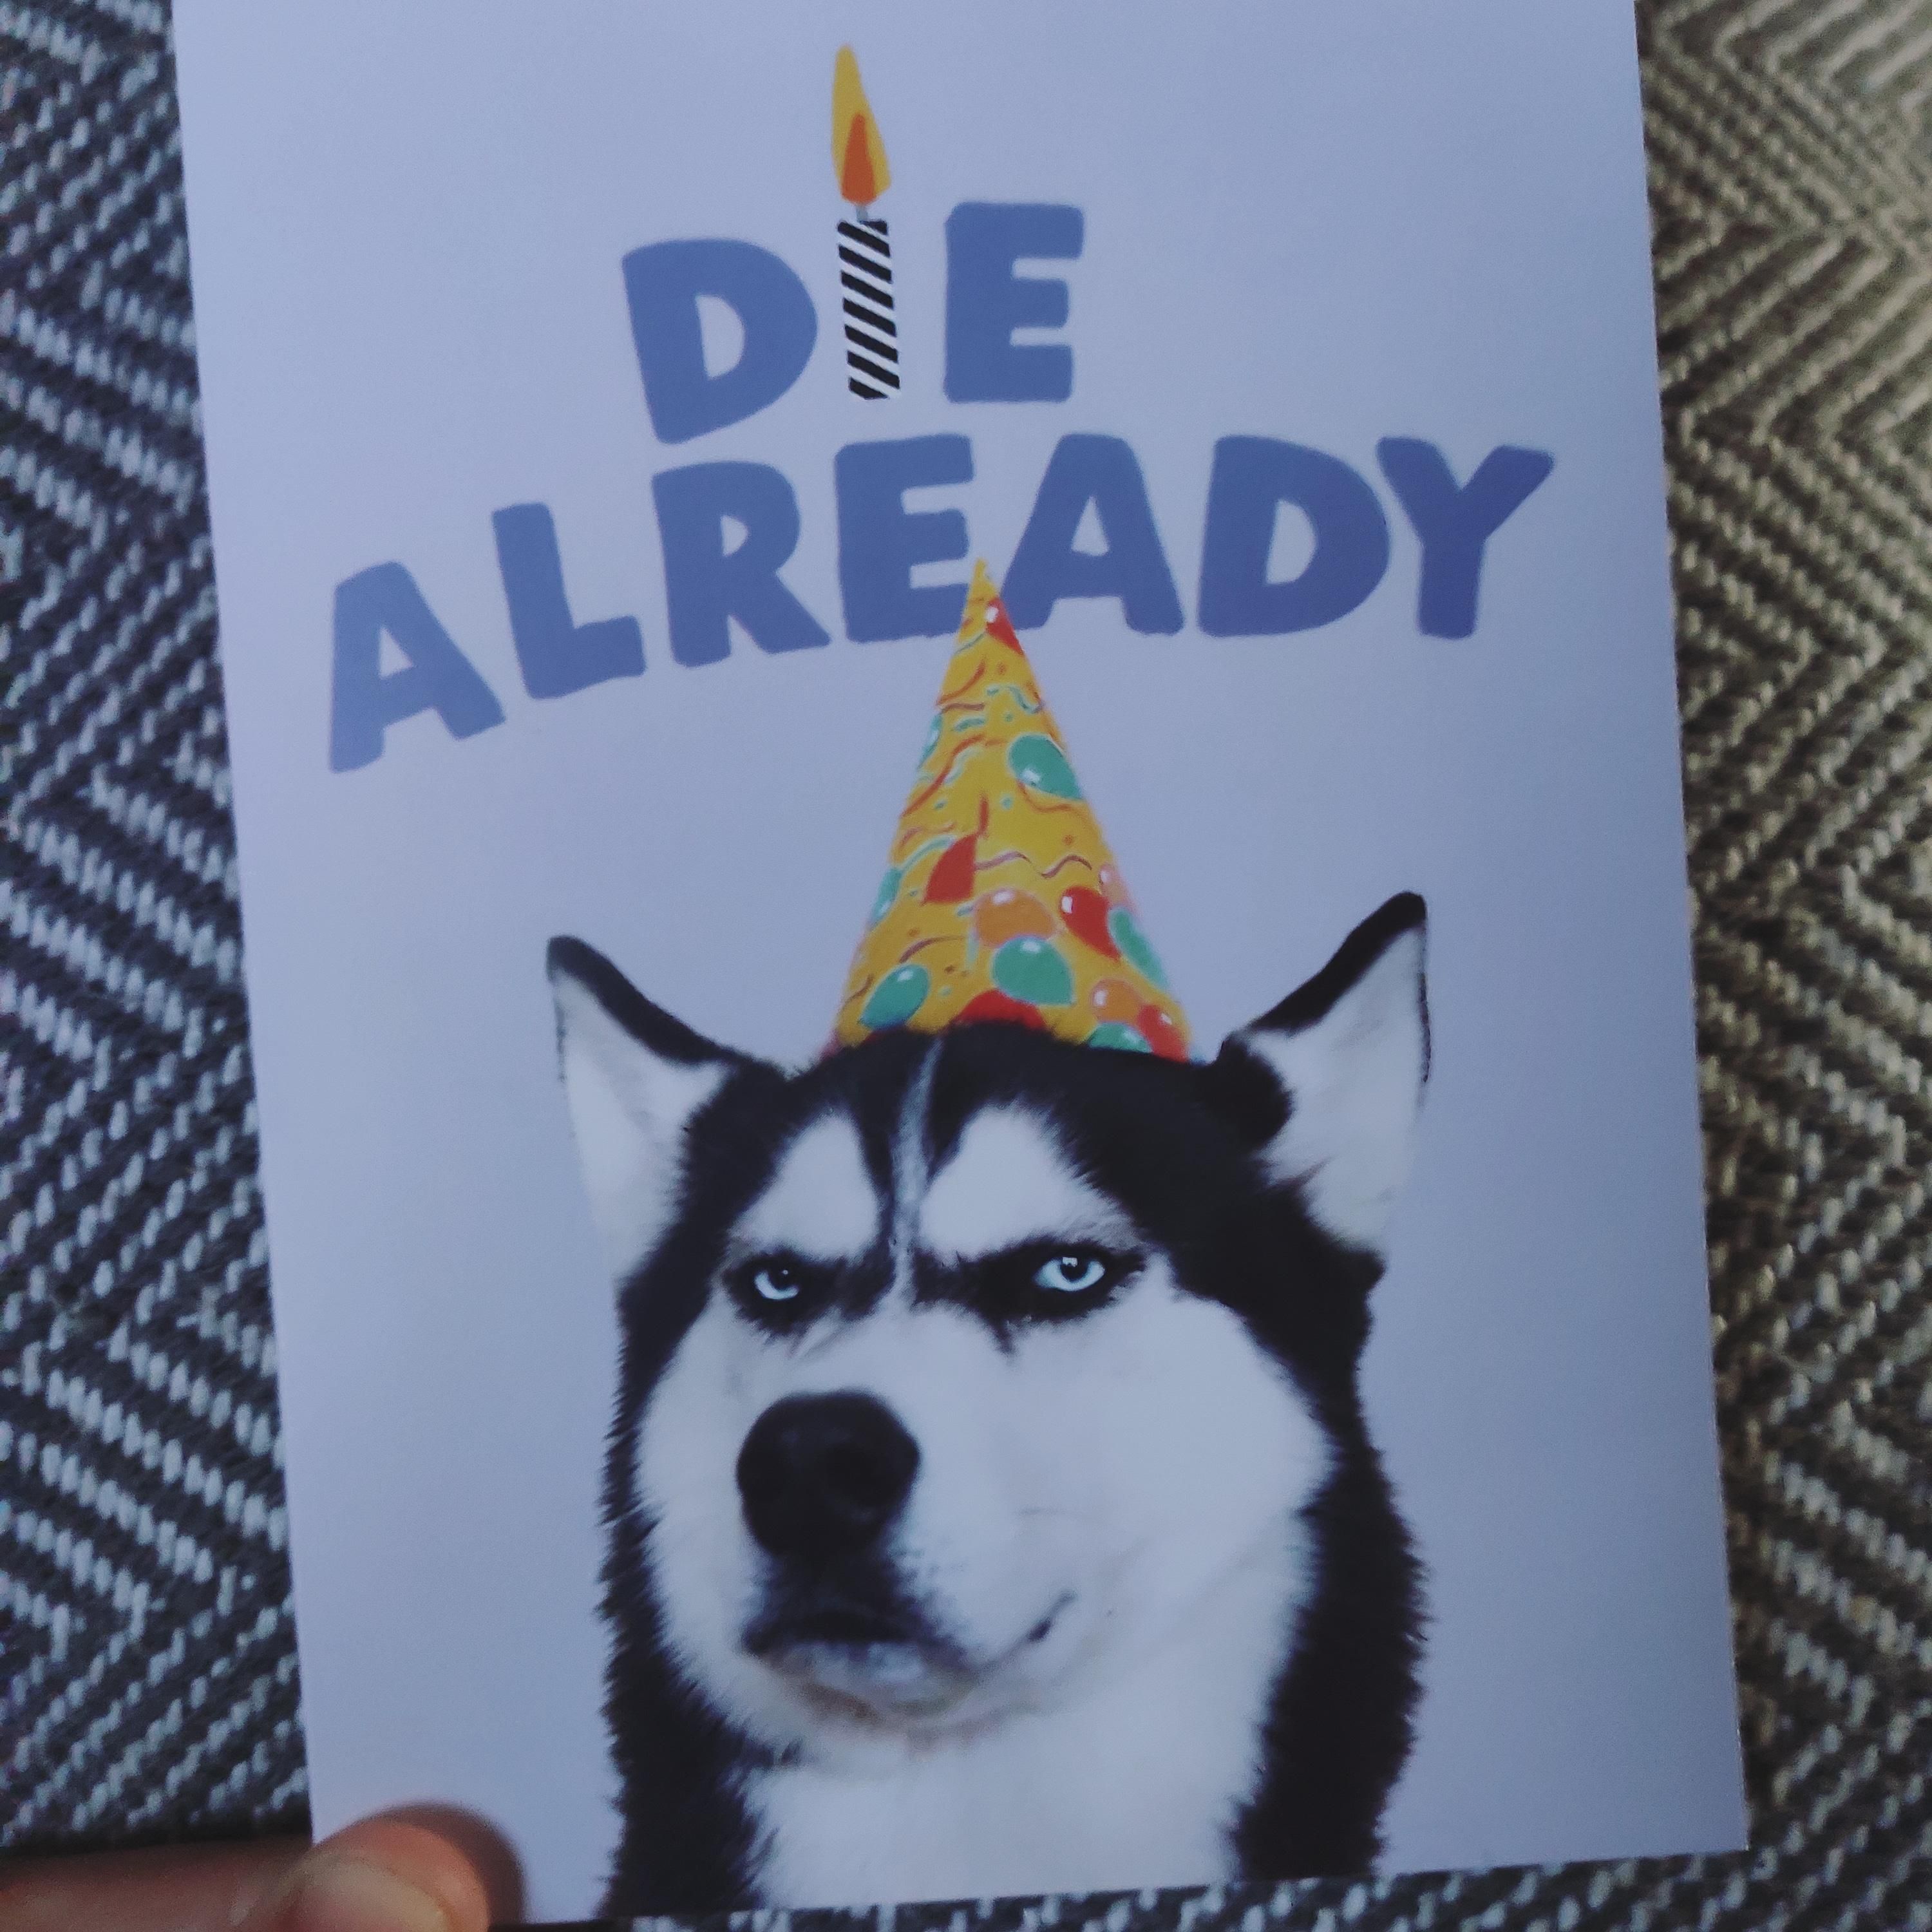 My 4 year old niece can't read and bought me this birthday card because it featured 'a cute dog with a party hat'